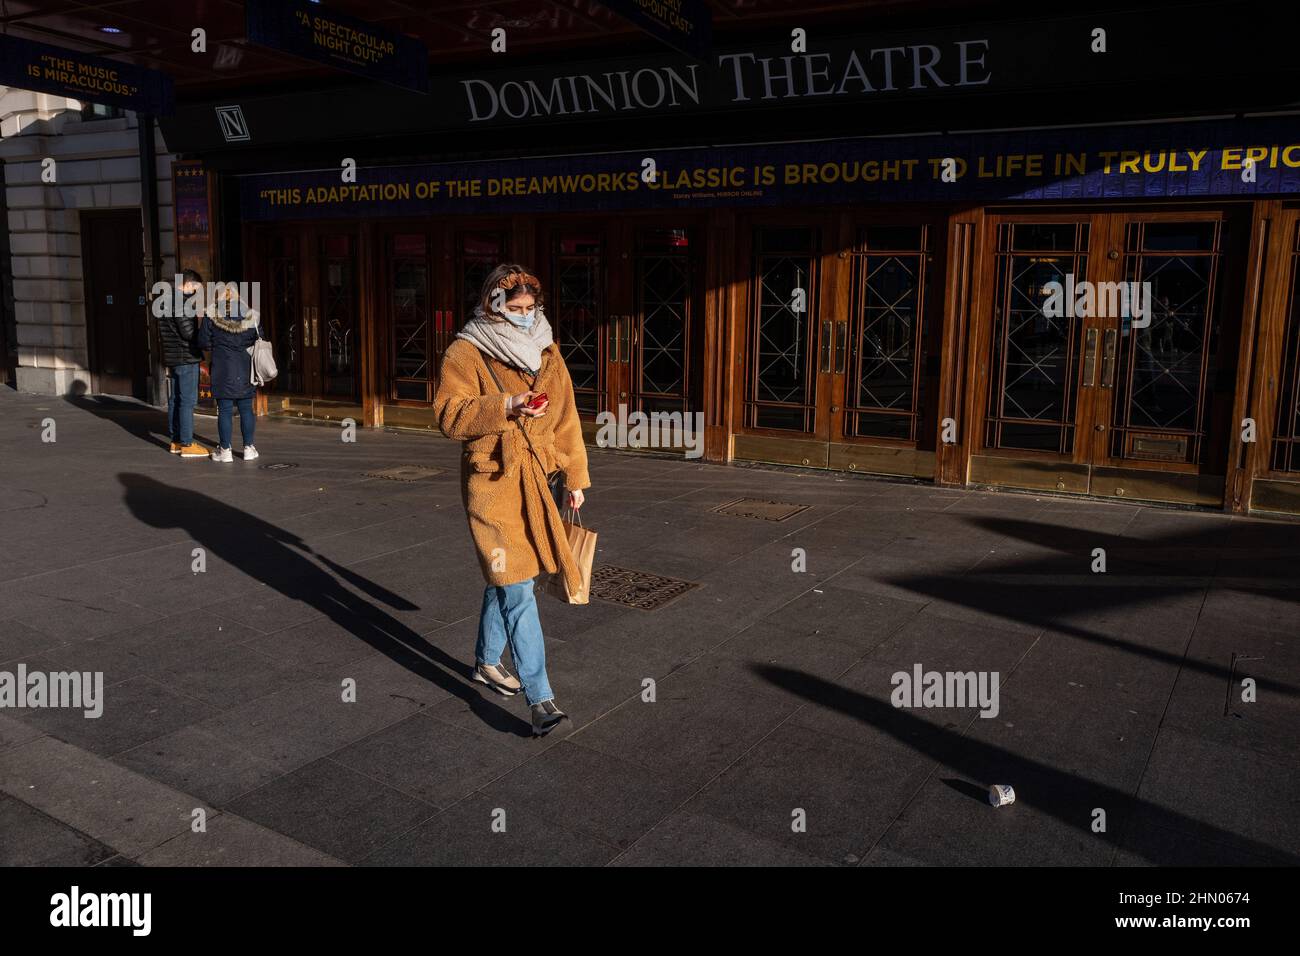 A woman makes her way past the Dominion Theatre in London's West End on a bright but chilly winter morning. London, United Kingdom Stock Photo